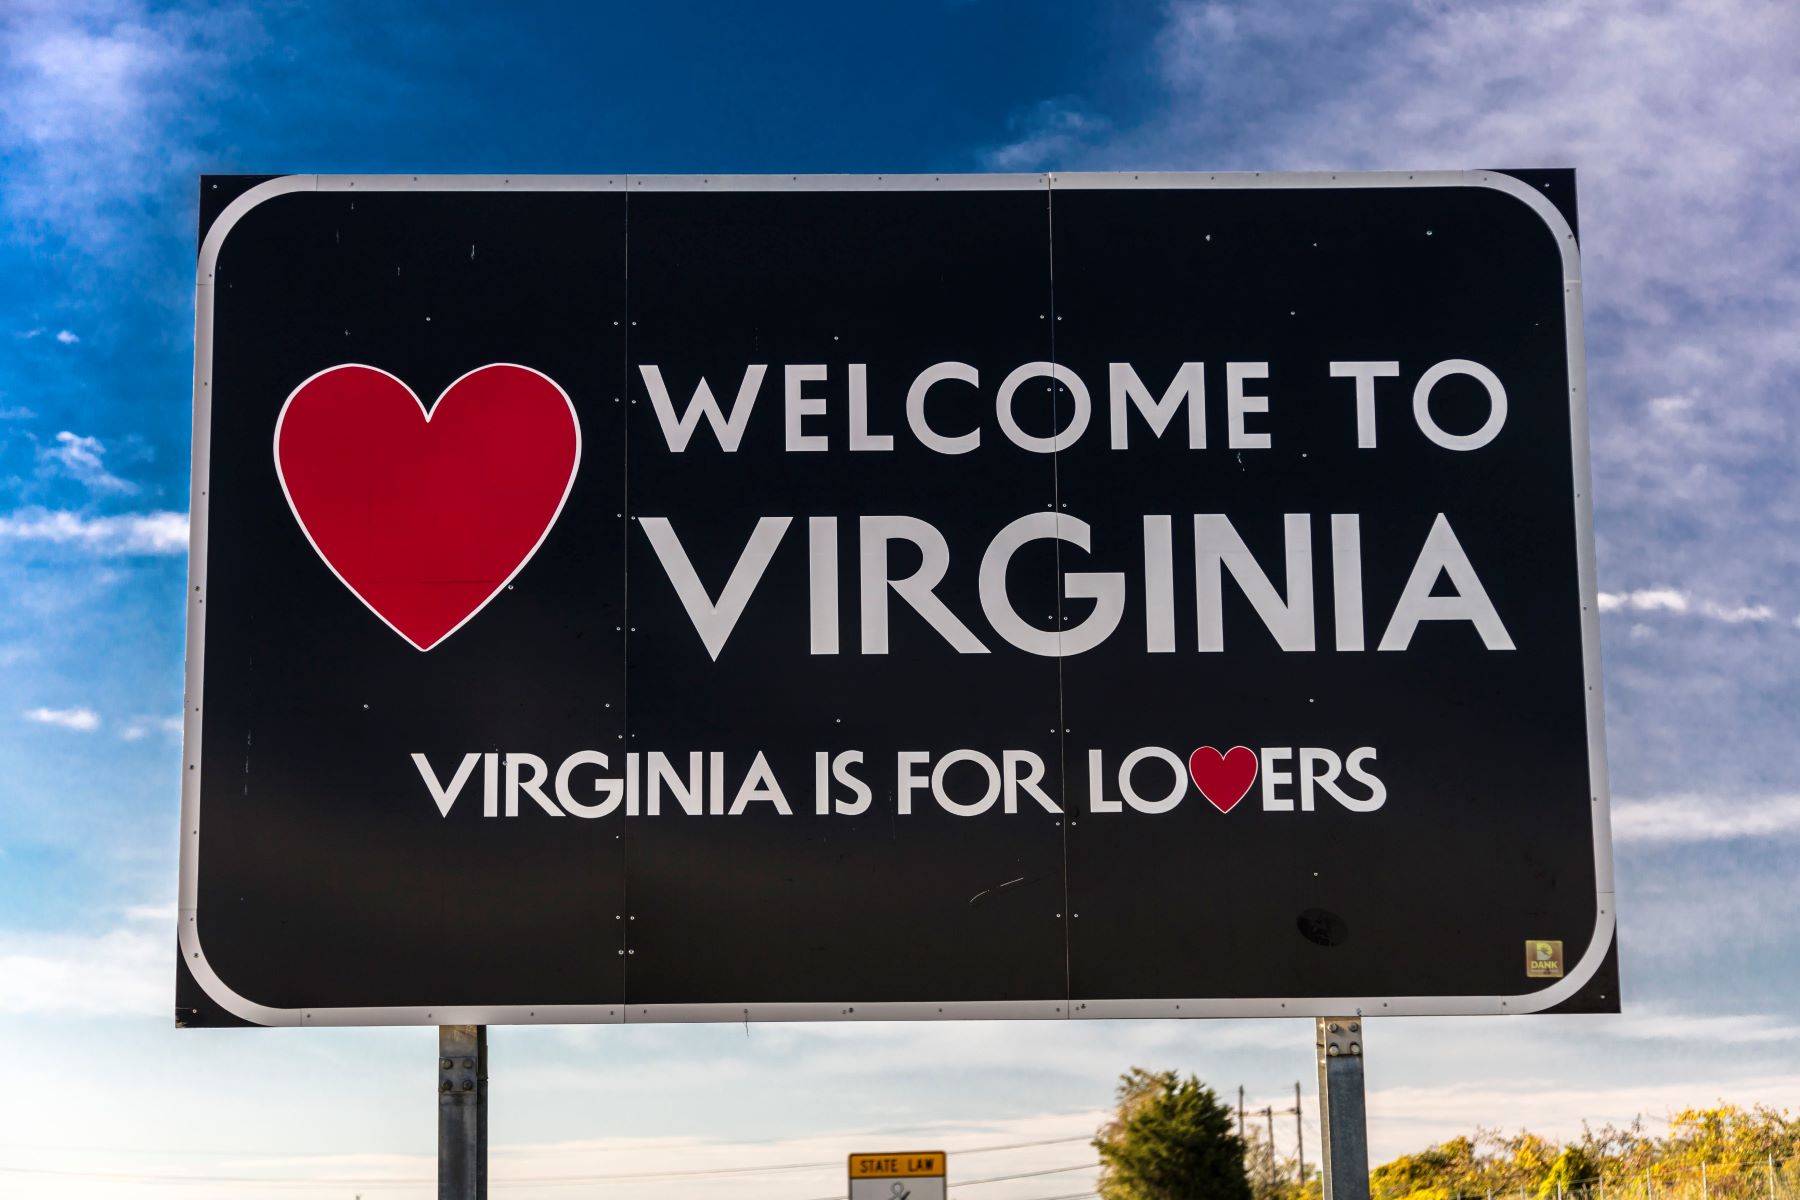 A 'Virginia is for Lovers' welcome sign for the state of Virginia